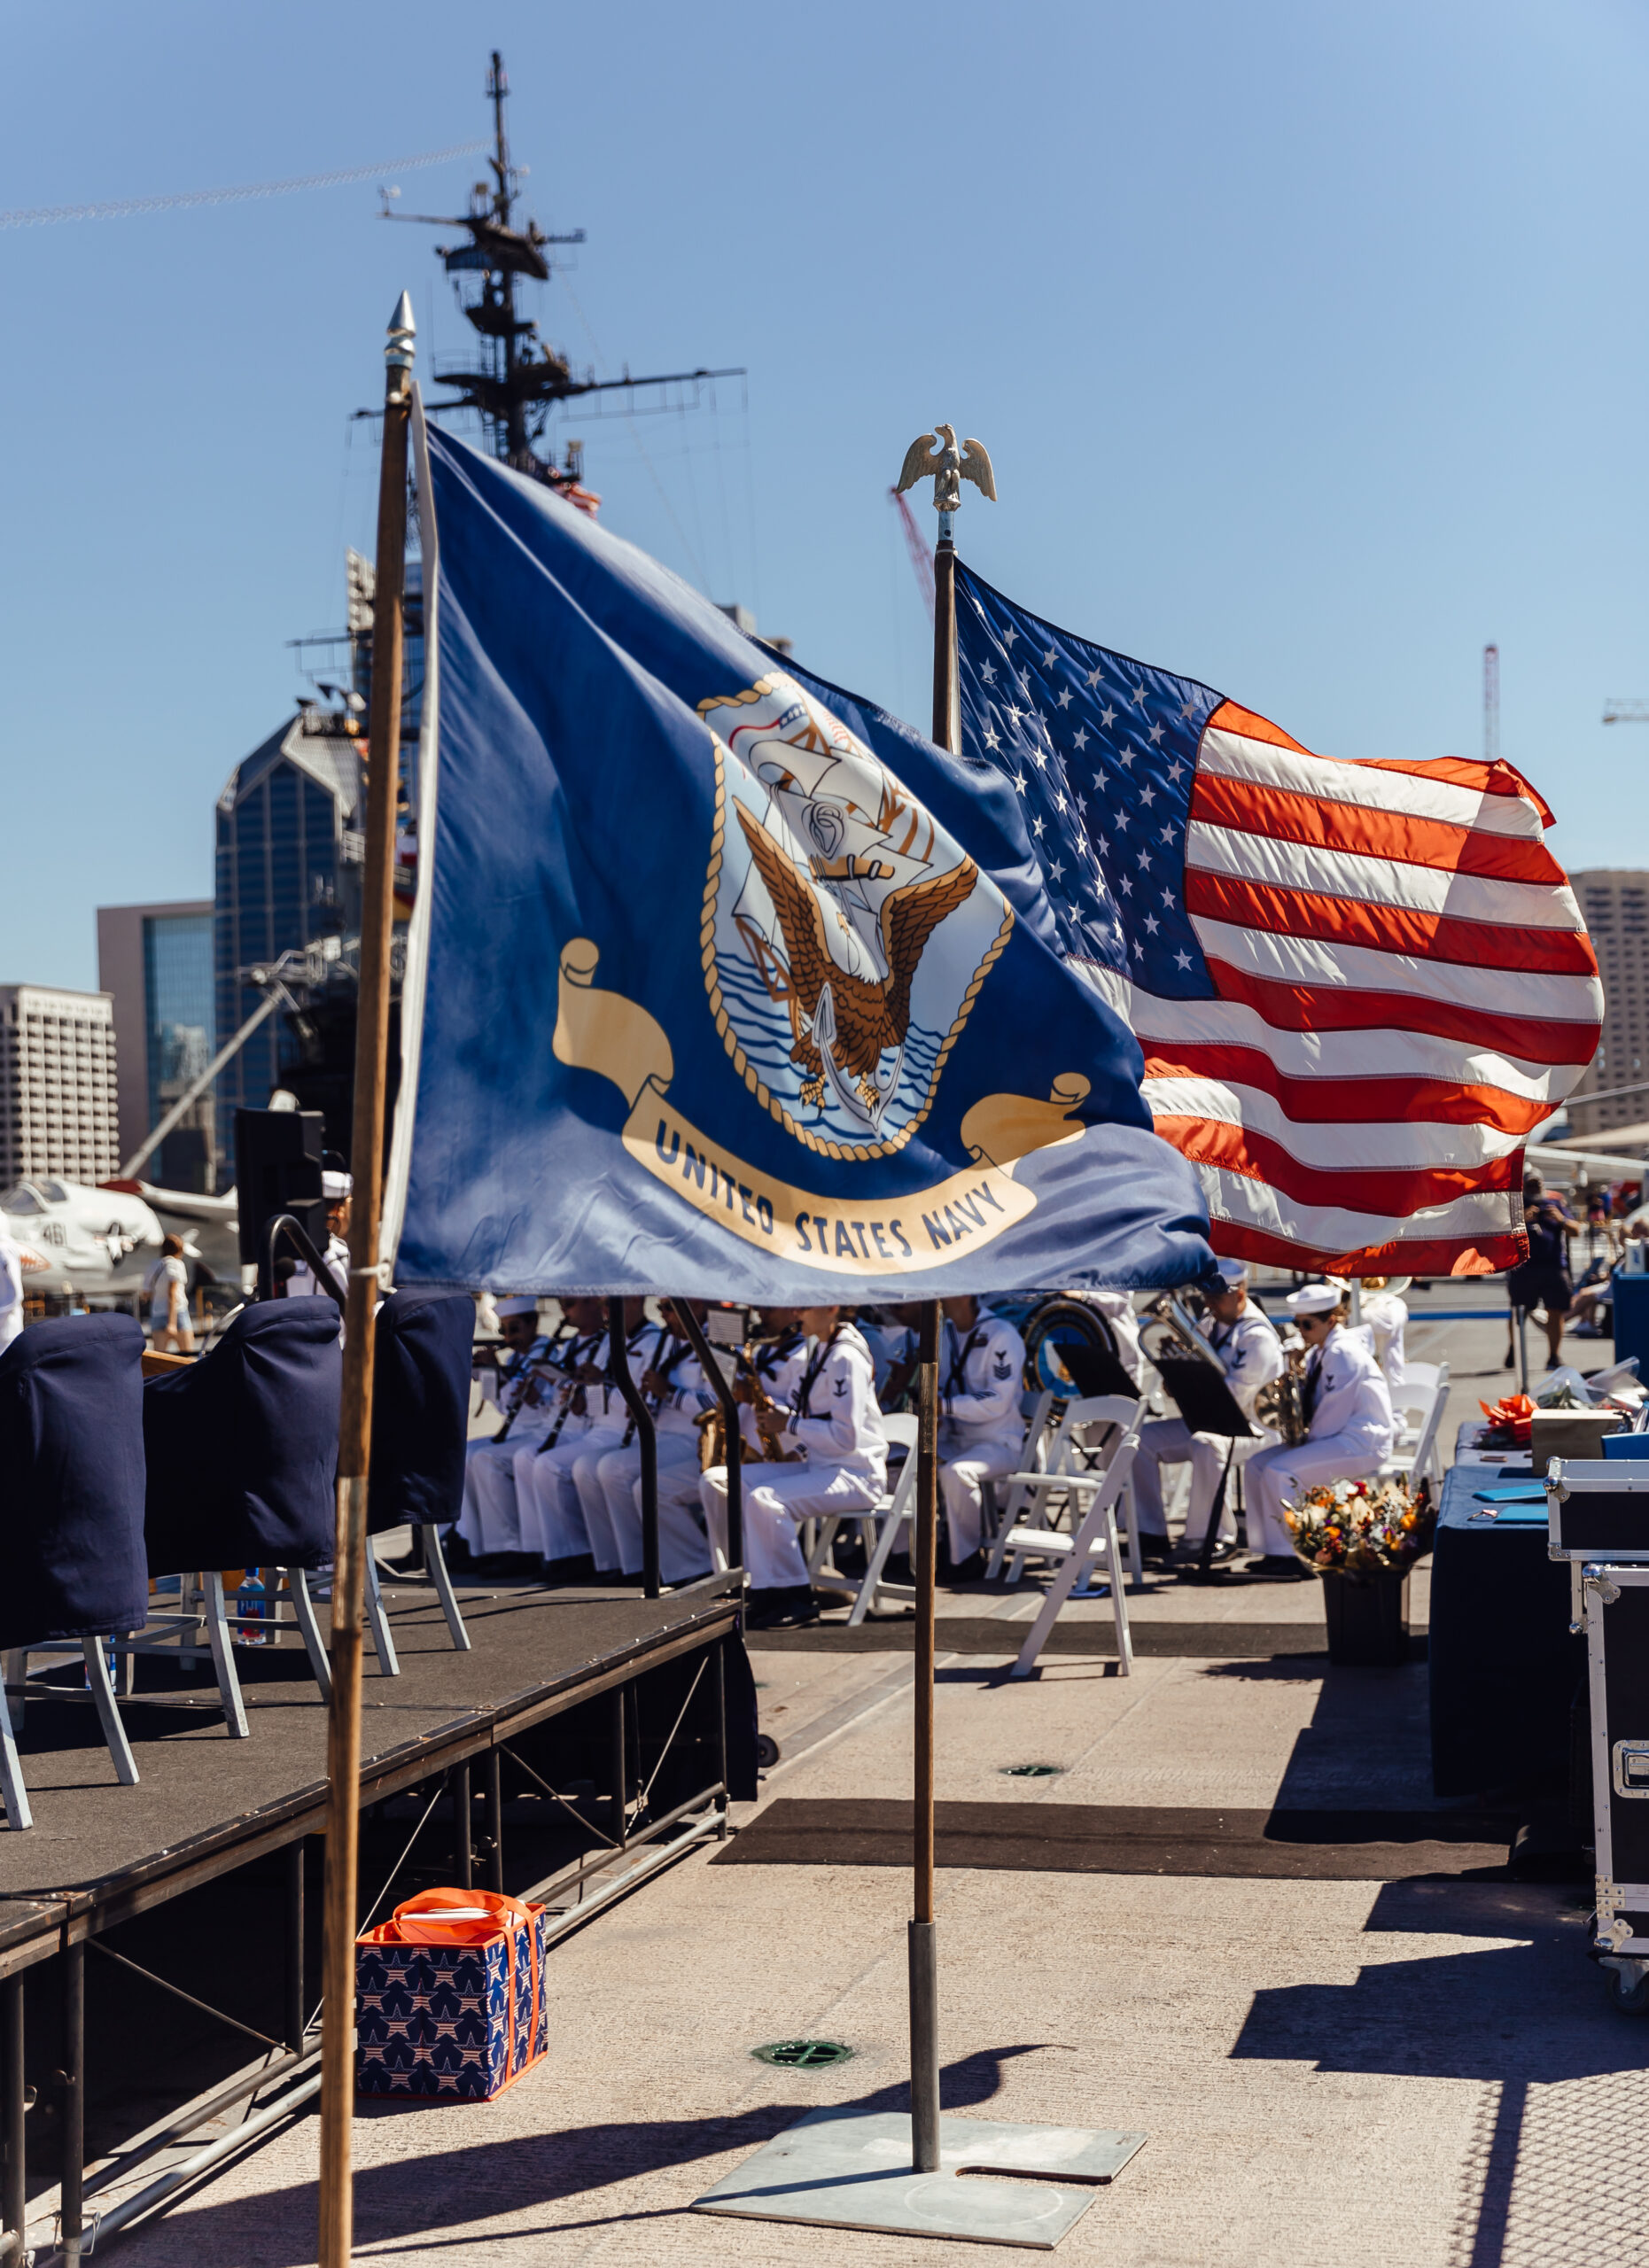 United States Navy flag with United States of America Flag